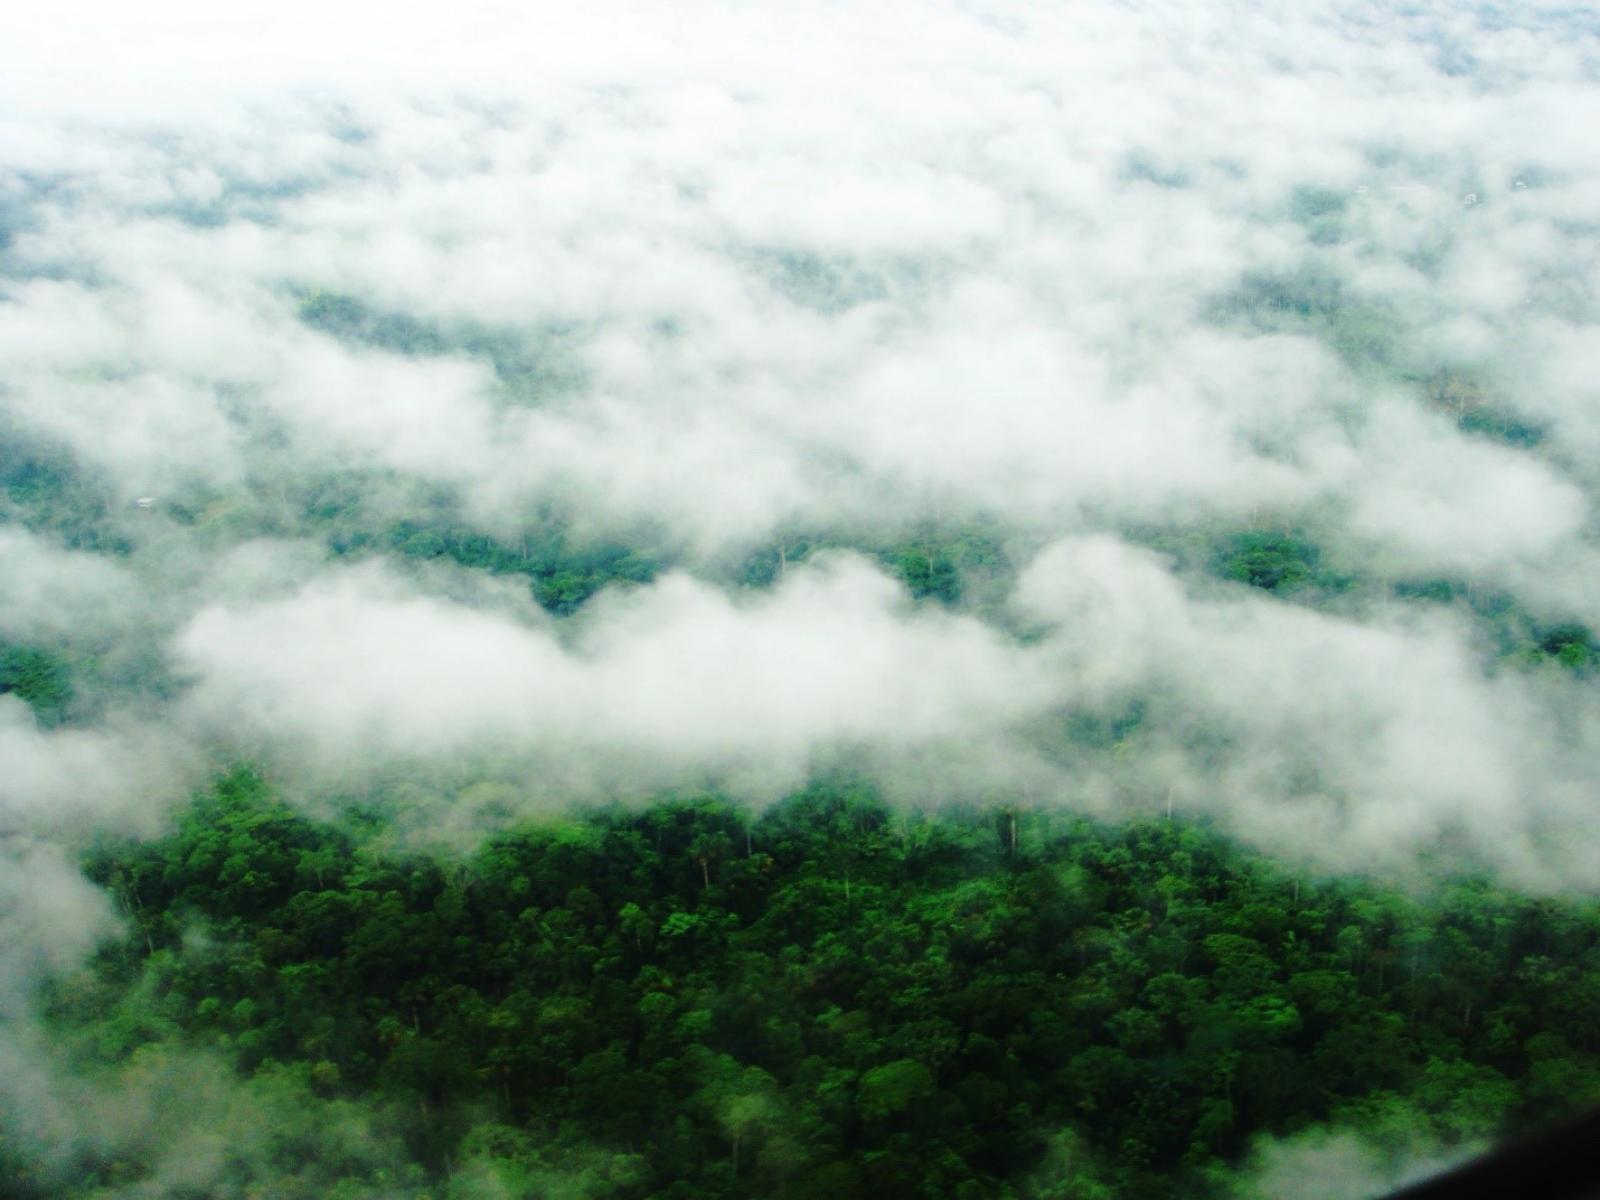 Photograph of clouds over the Amazon rainforest